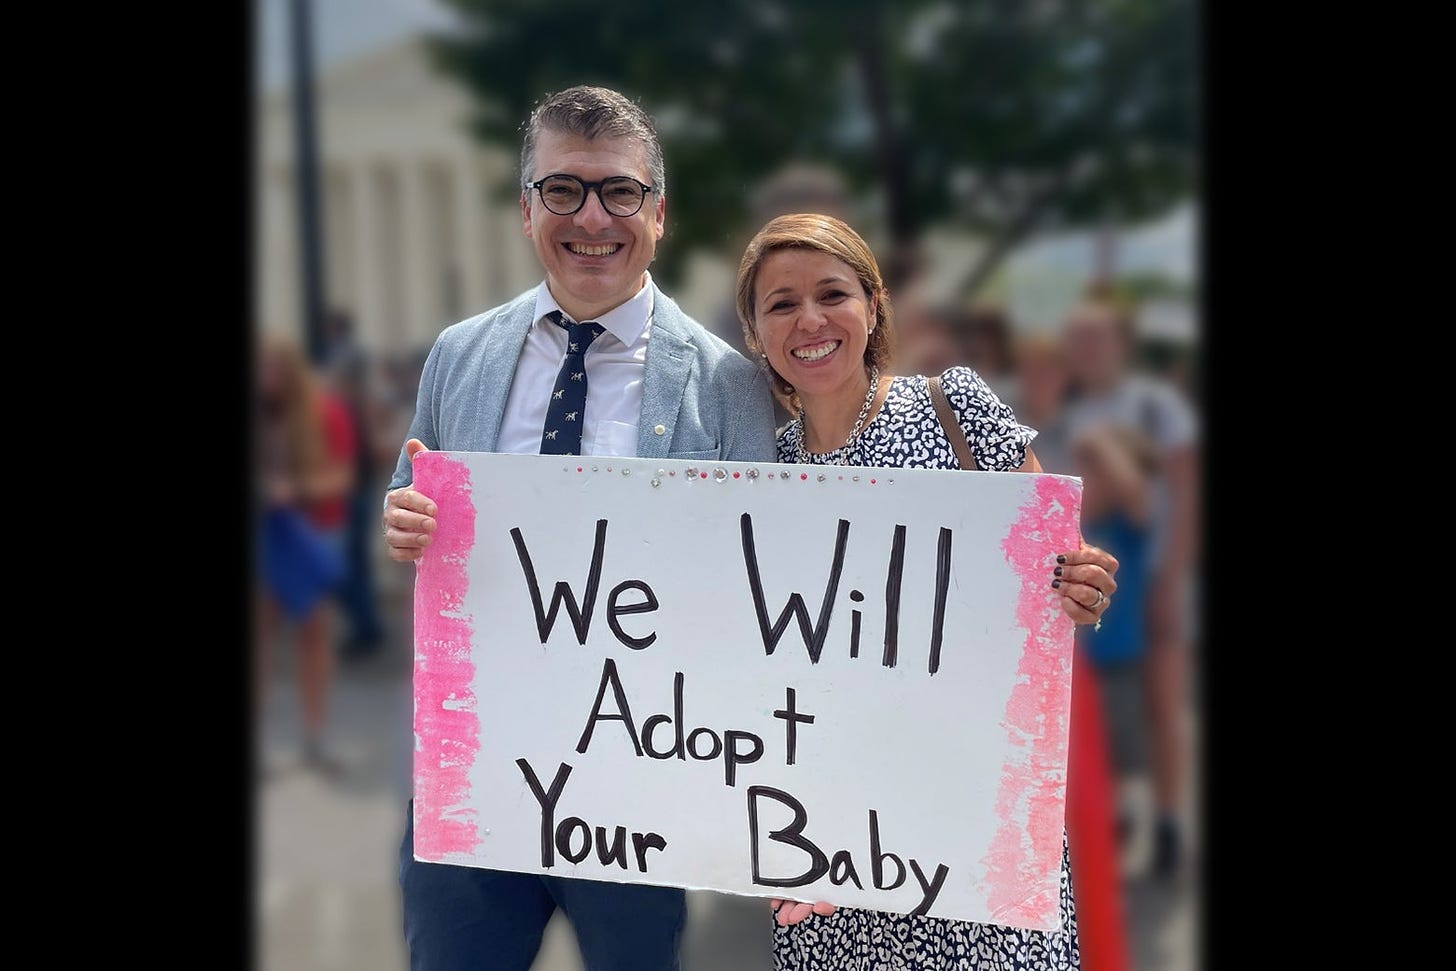 A photo of a couple holding a sign that says "We Will Adopt Your Baby" that was taken outside of the Supreme Court in Washington D.C. after Roe v Wade was overturned.